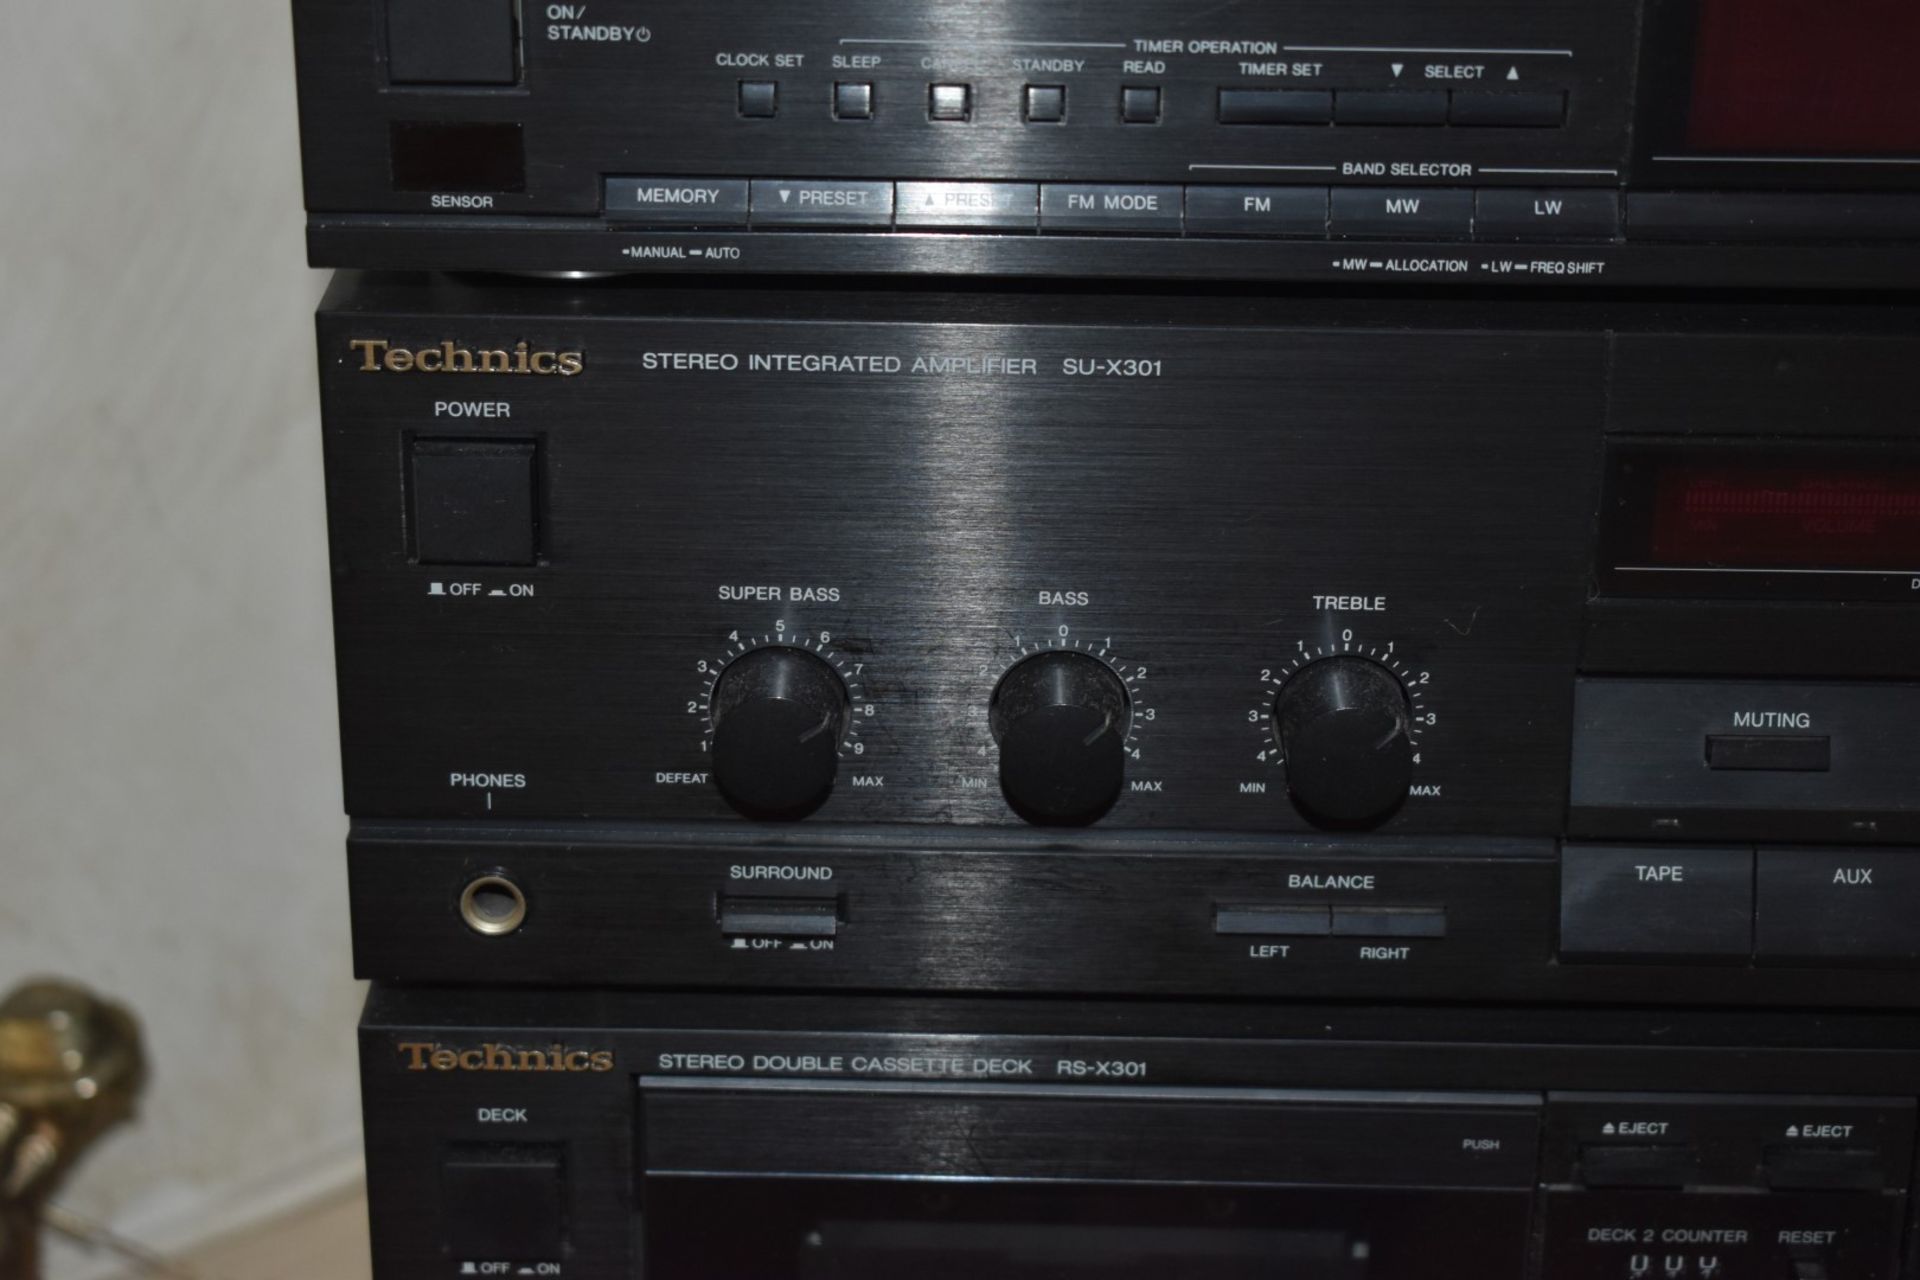 1 x Technics Separates Stereo System - Includes LW/MW/FM Tuner, Integrated Amplifier, Double - Image 8 of 9